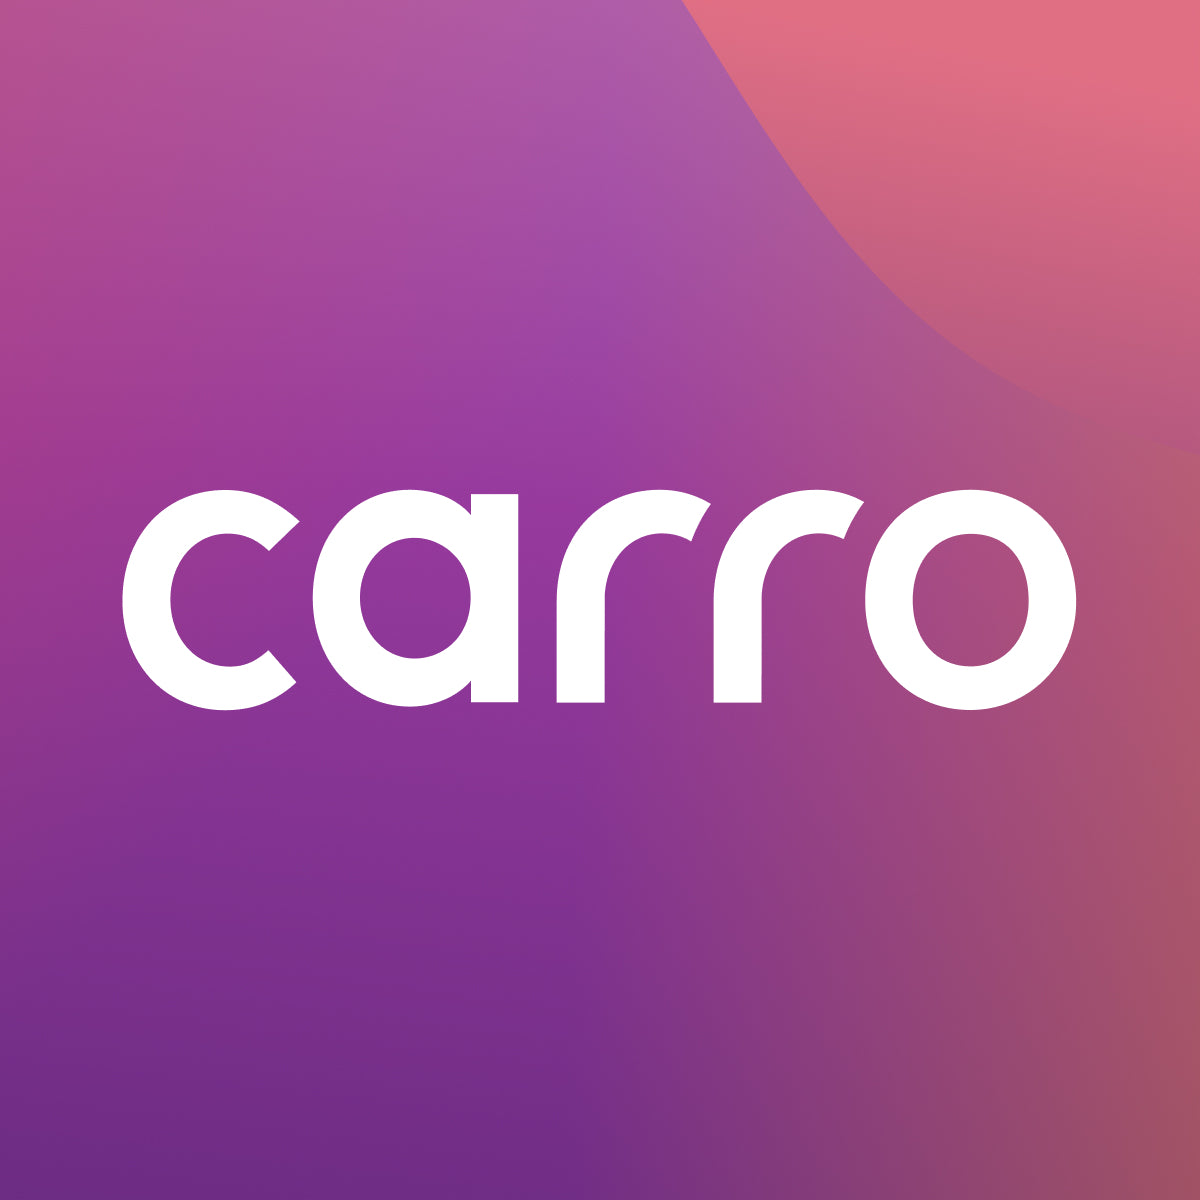 Carro: Sell More, Together